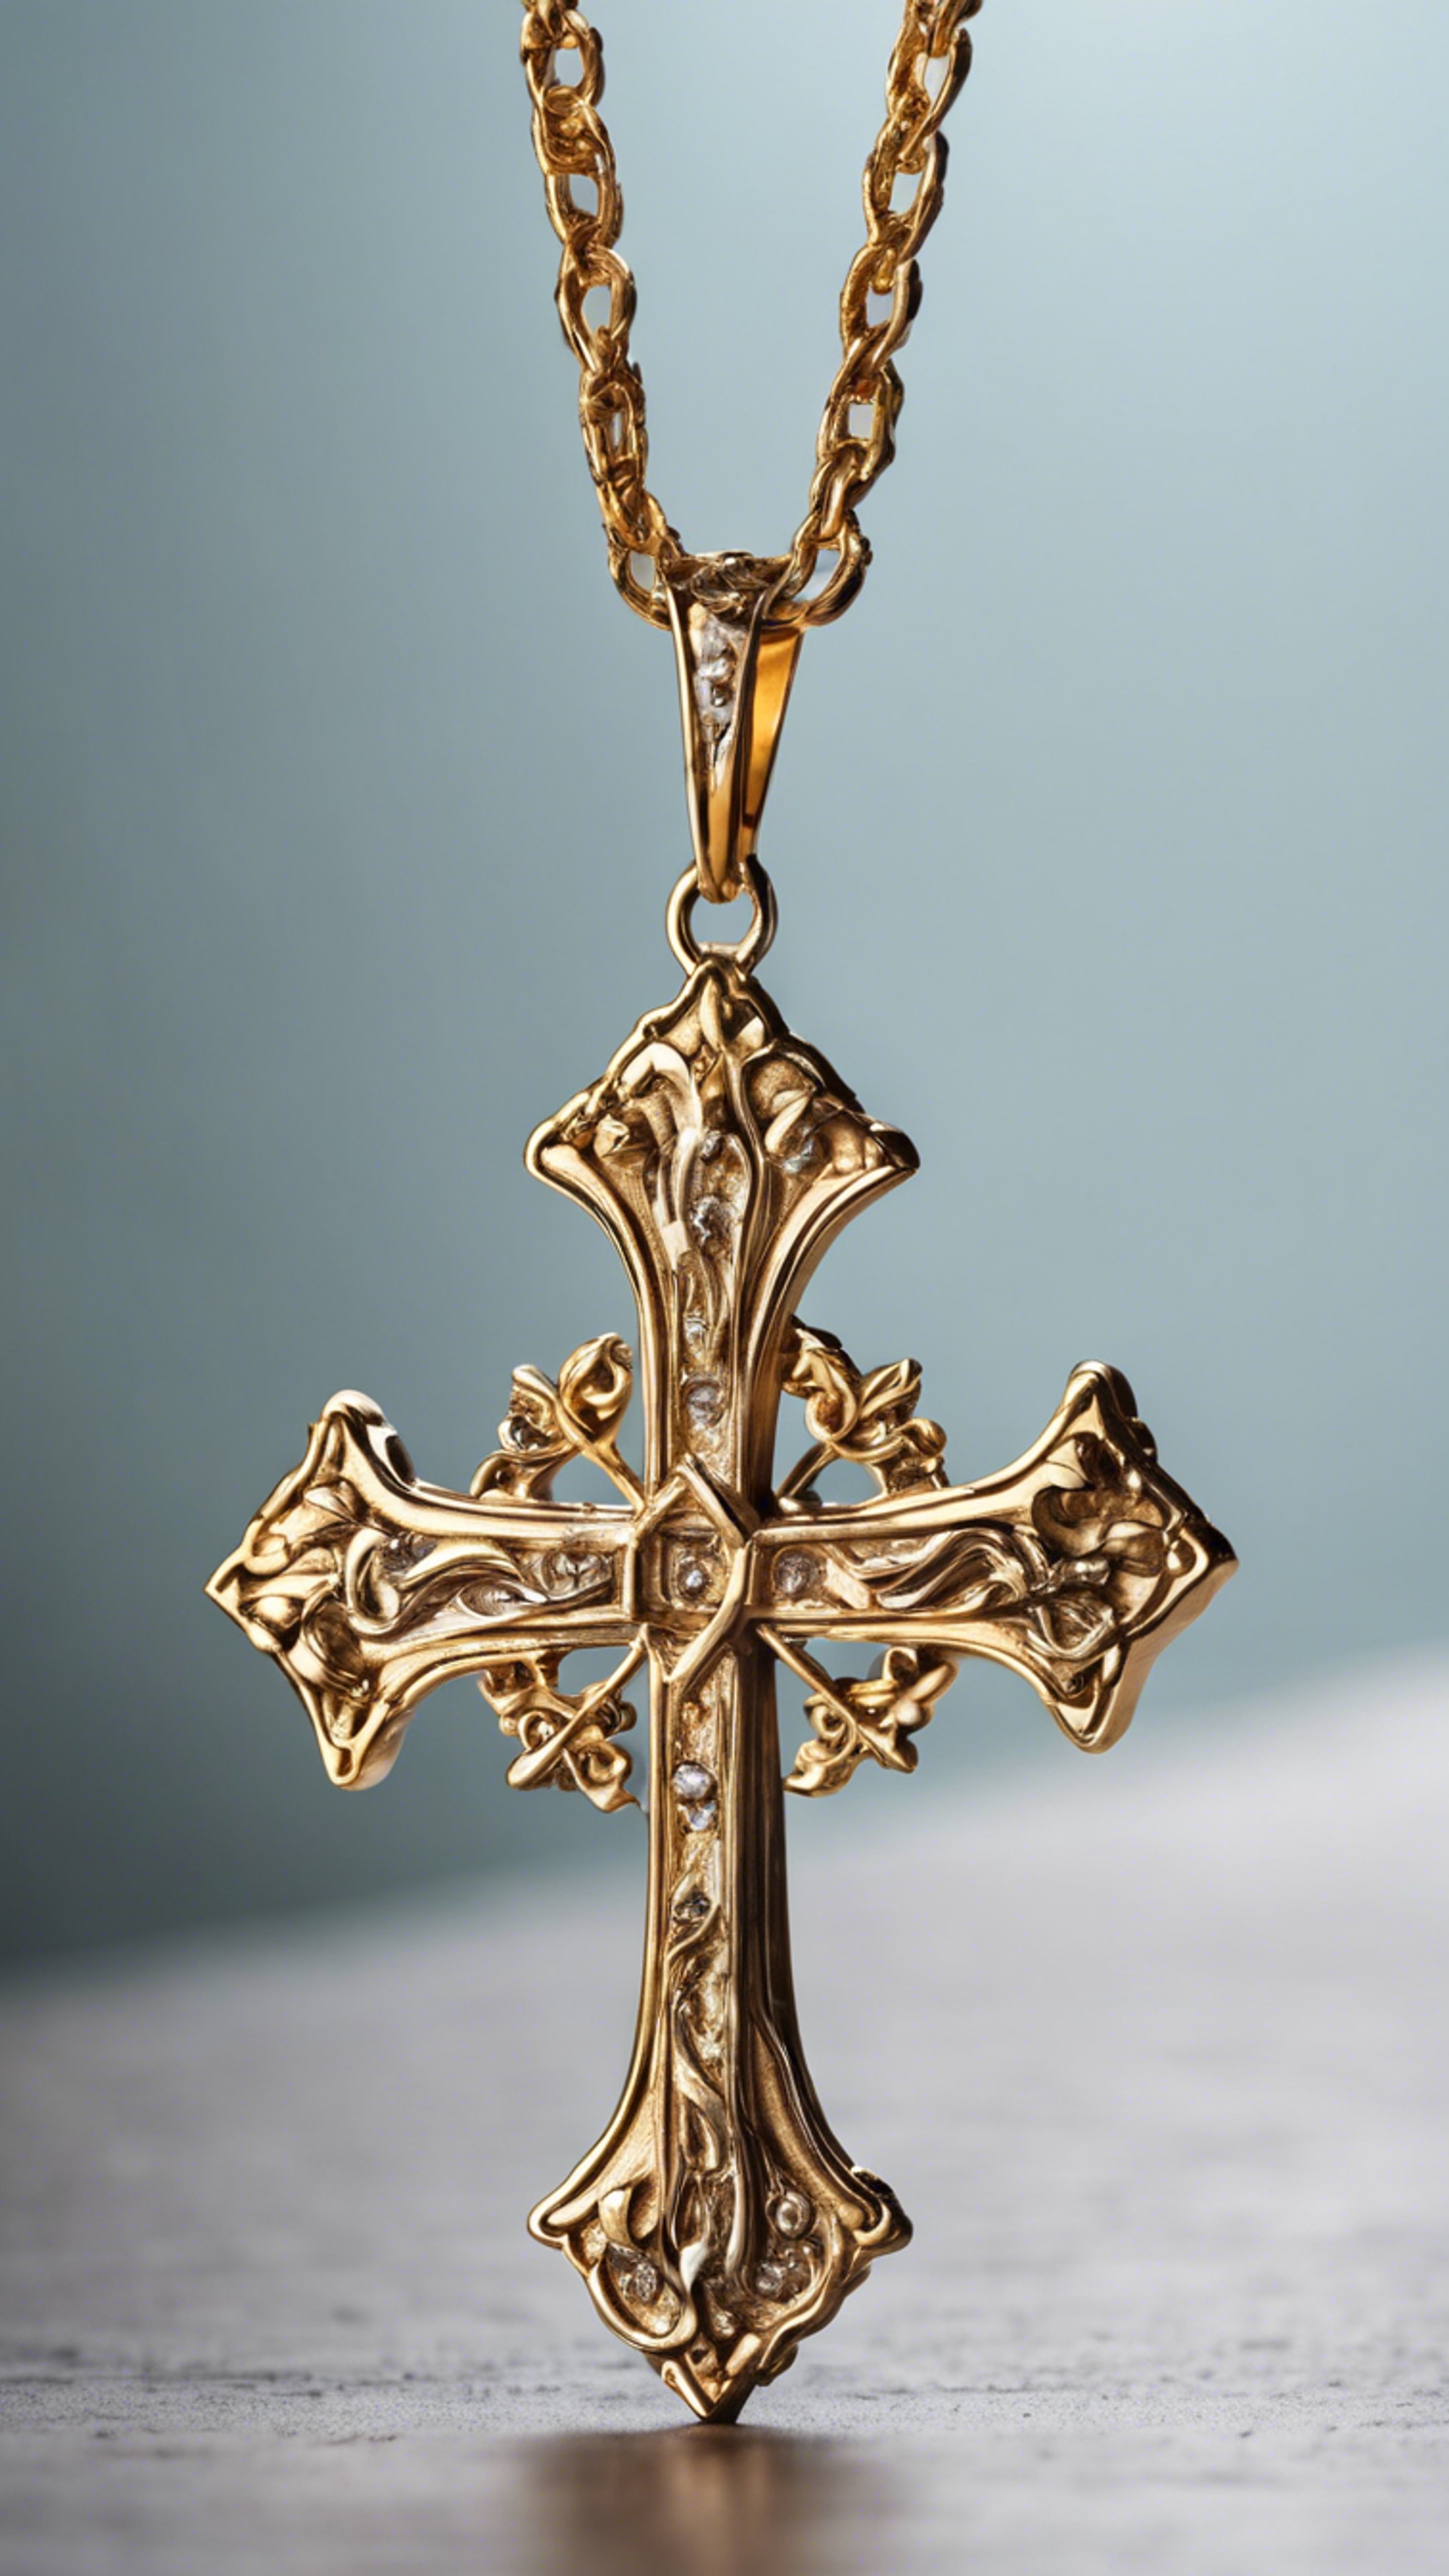 A cross pendant made of pure gold suspended by a strong chain.壁紙[e5be87803f6742a48291]